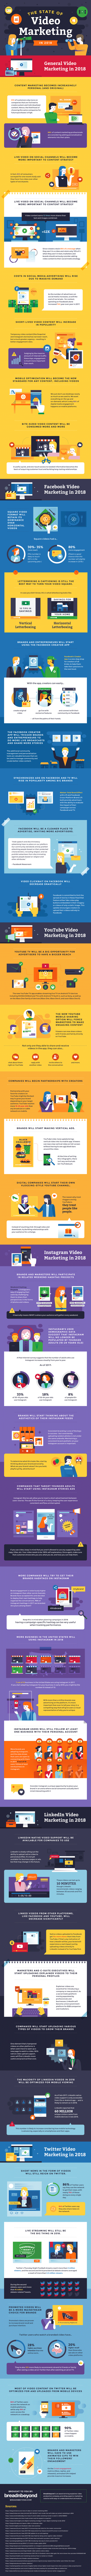 State of Video Marketing